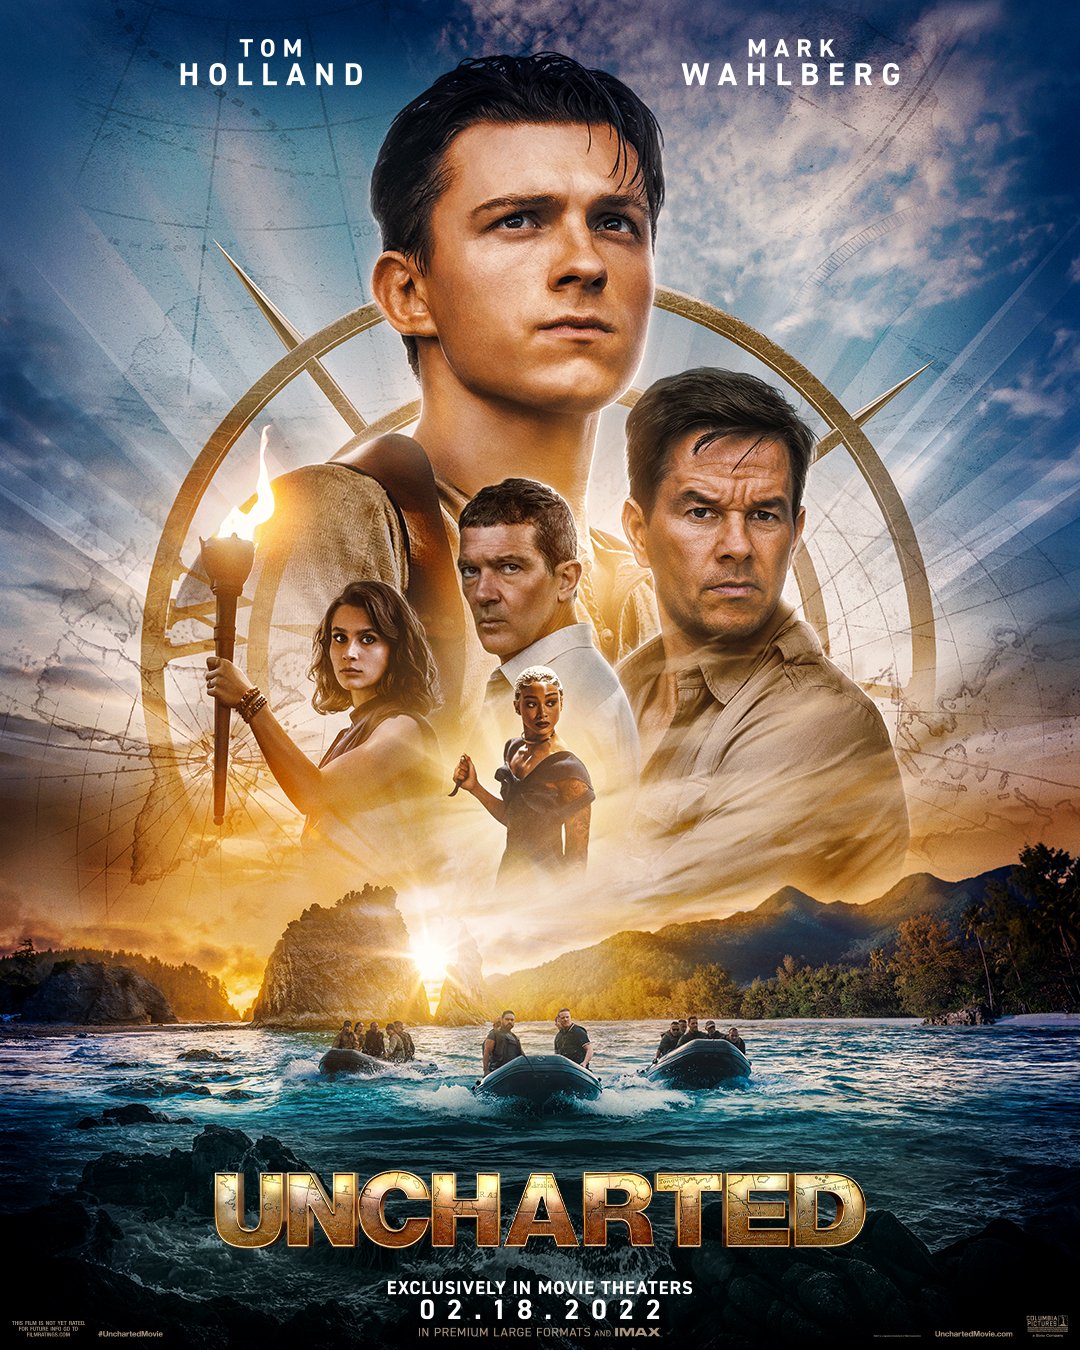 New Movie: ‘Uncharted’ Starring Tom Holland, Mark Wahlberg